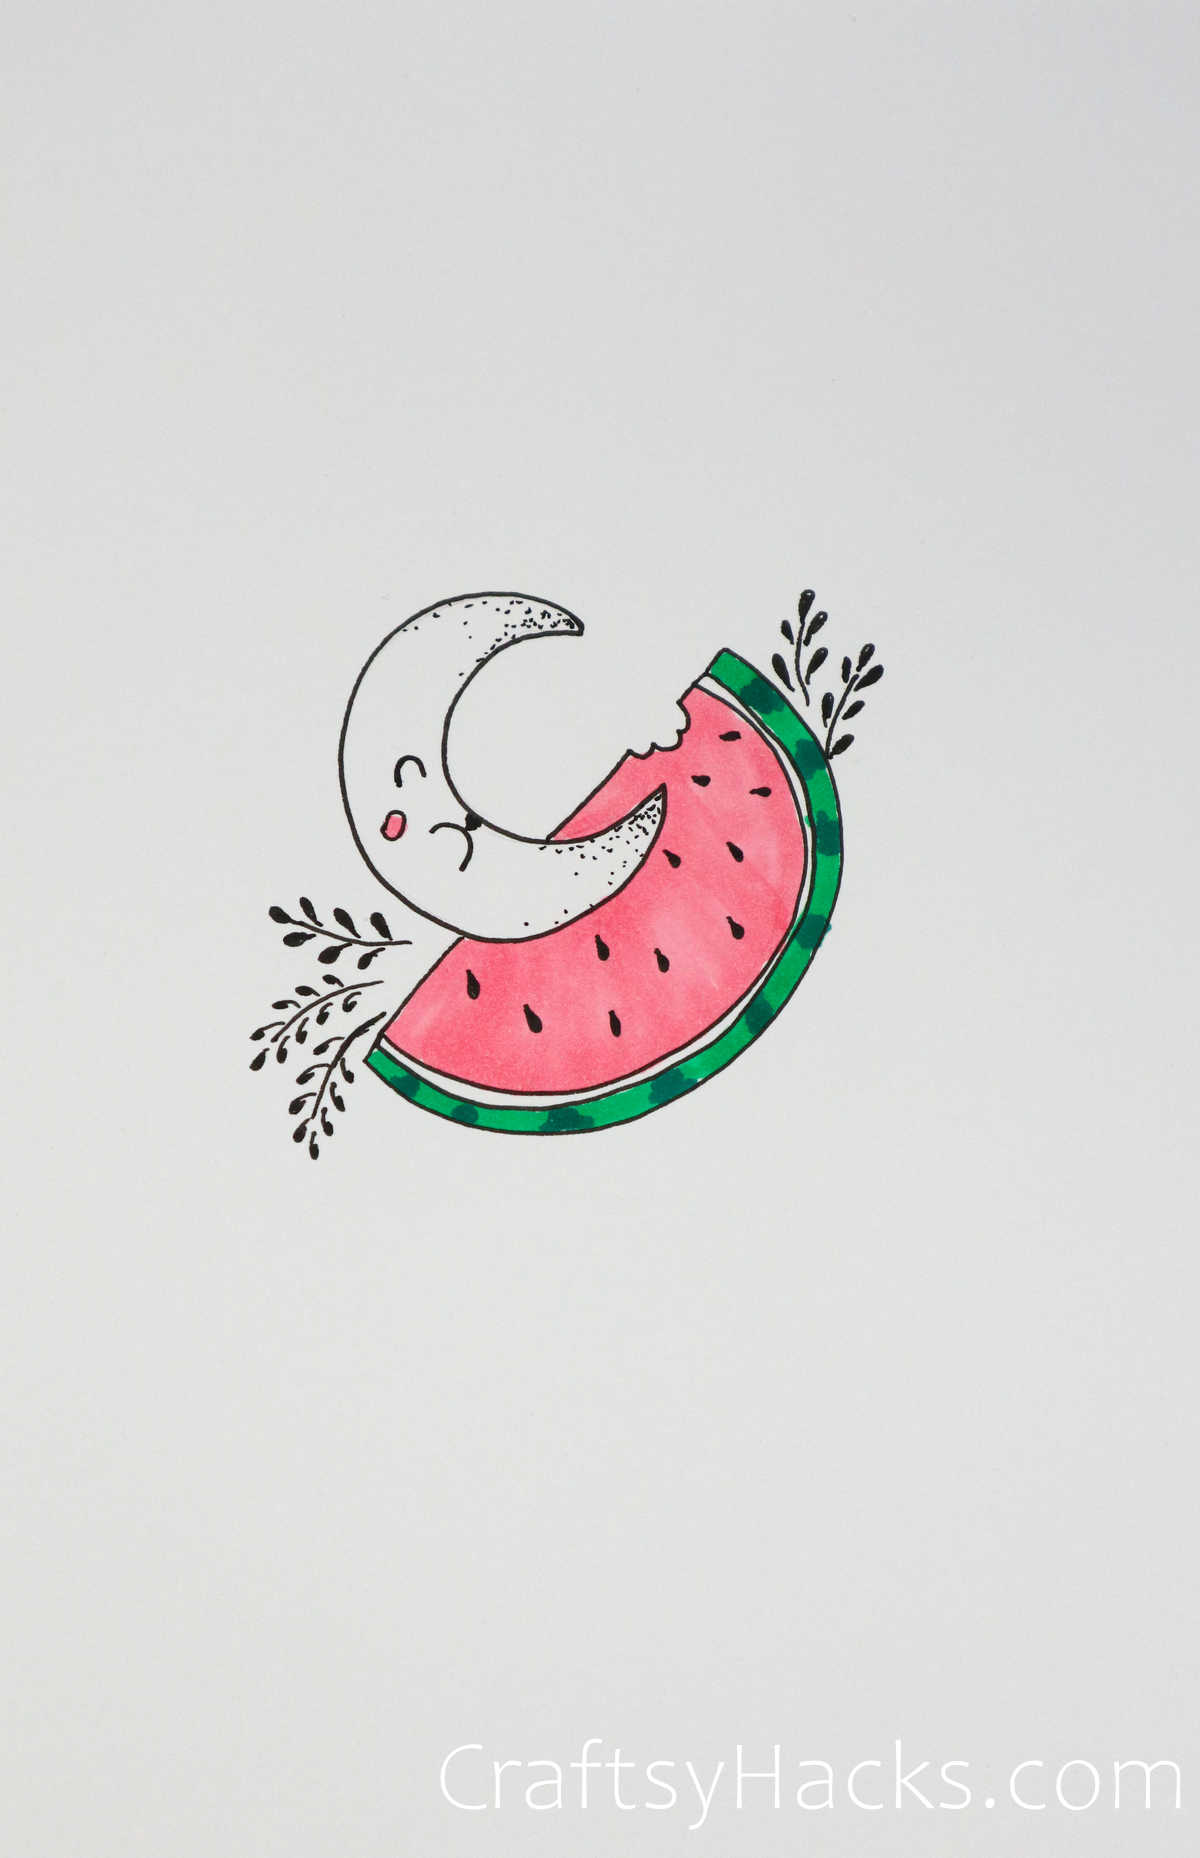 the moon and the watermelon